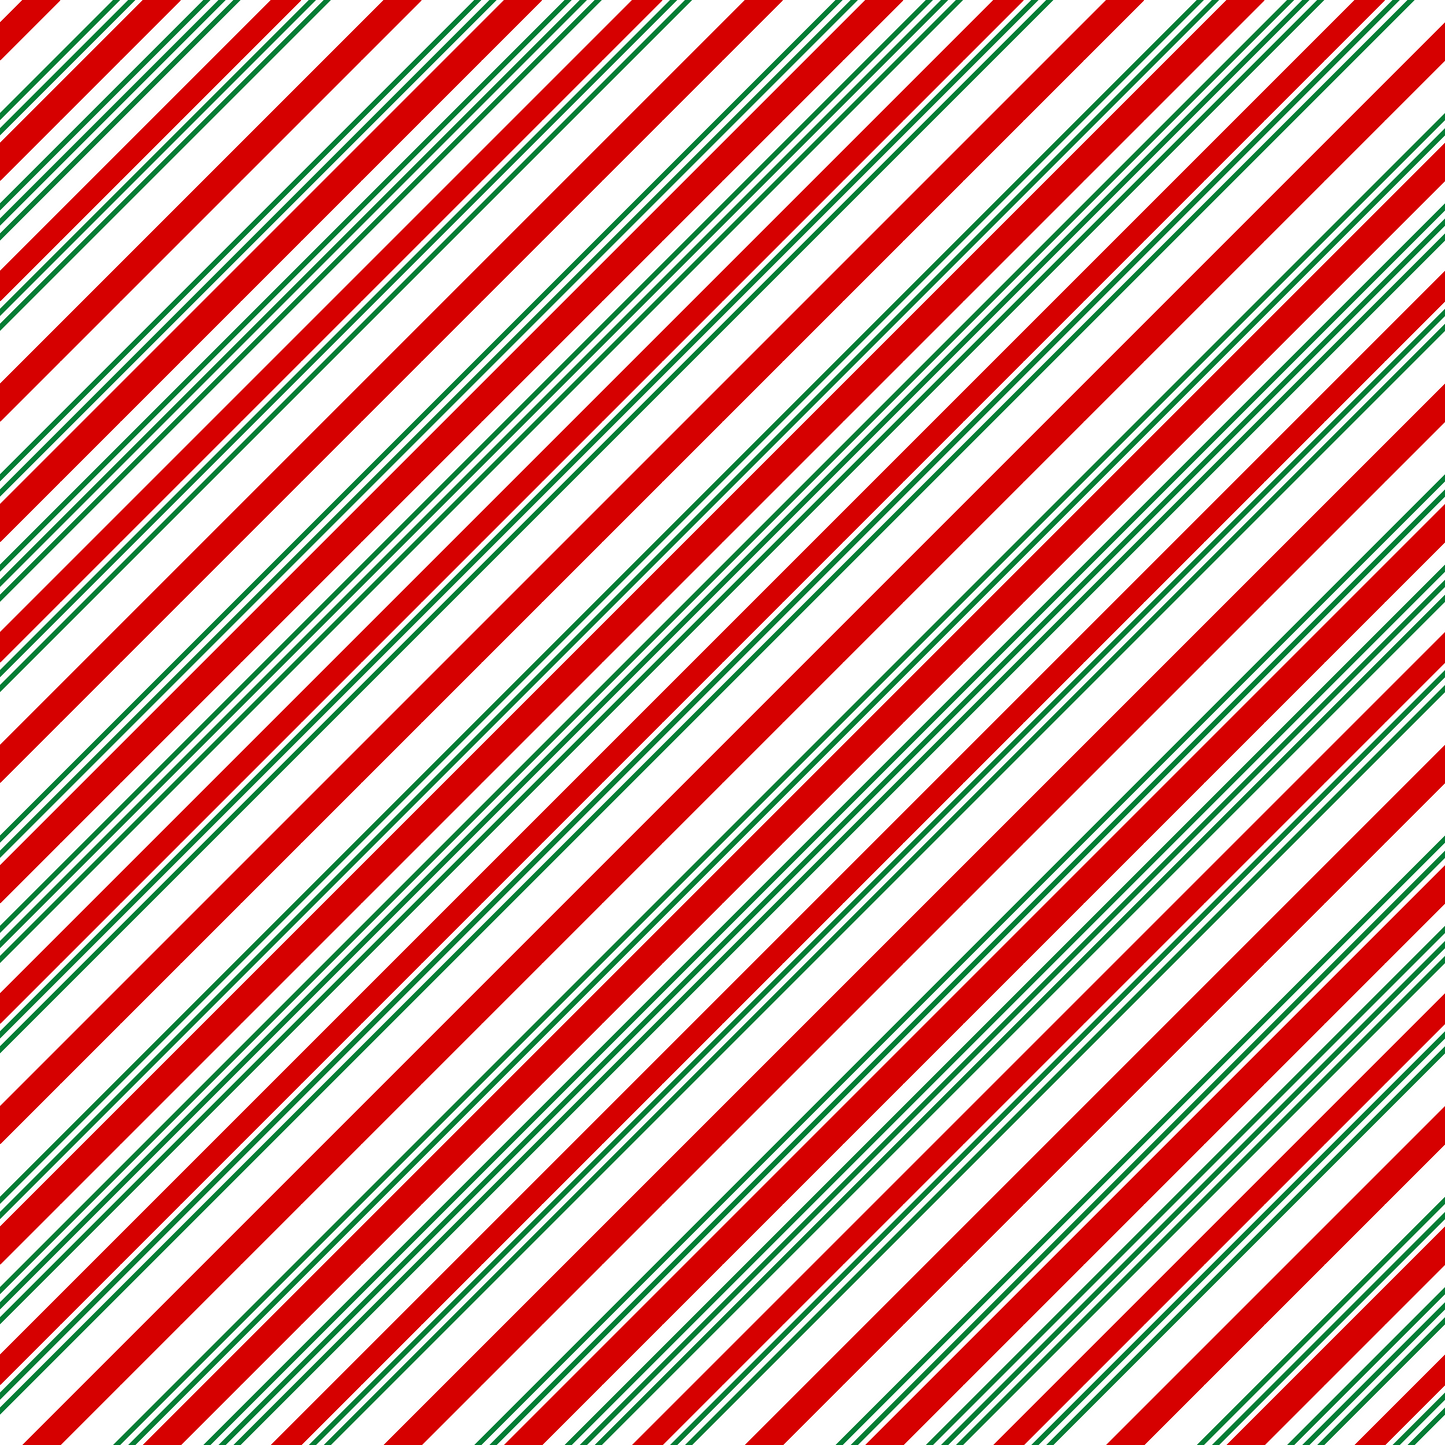 Candy Cane Stripes - Red and Green Stripes 017